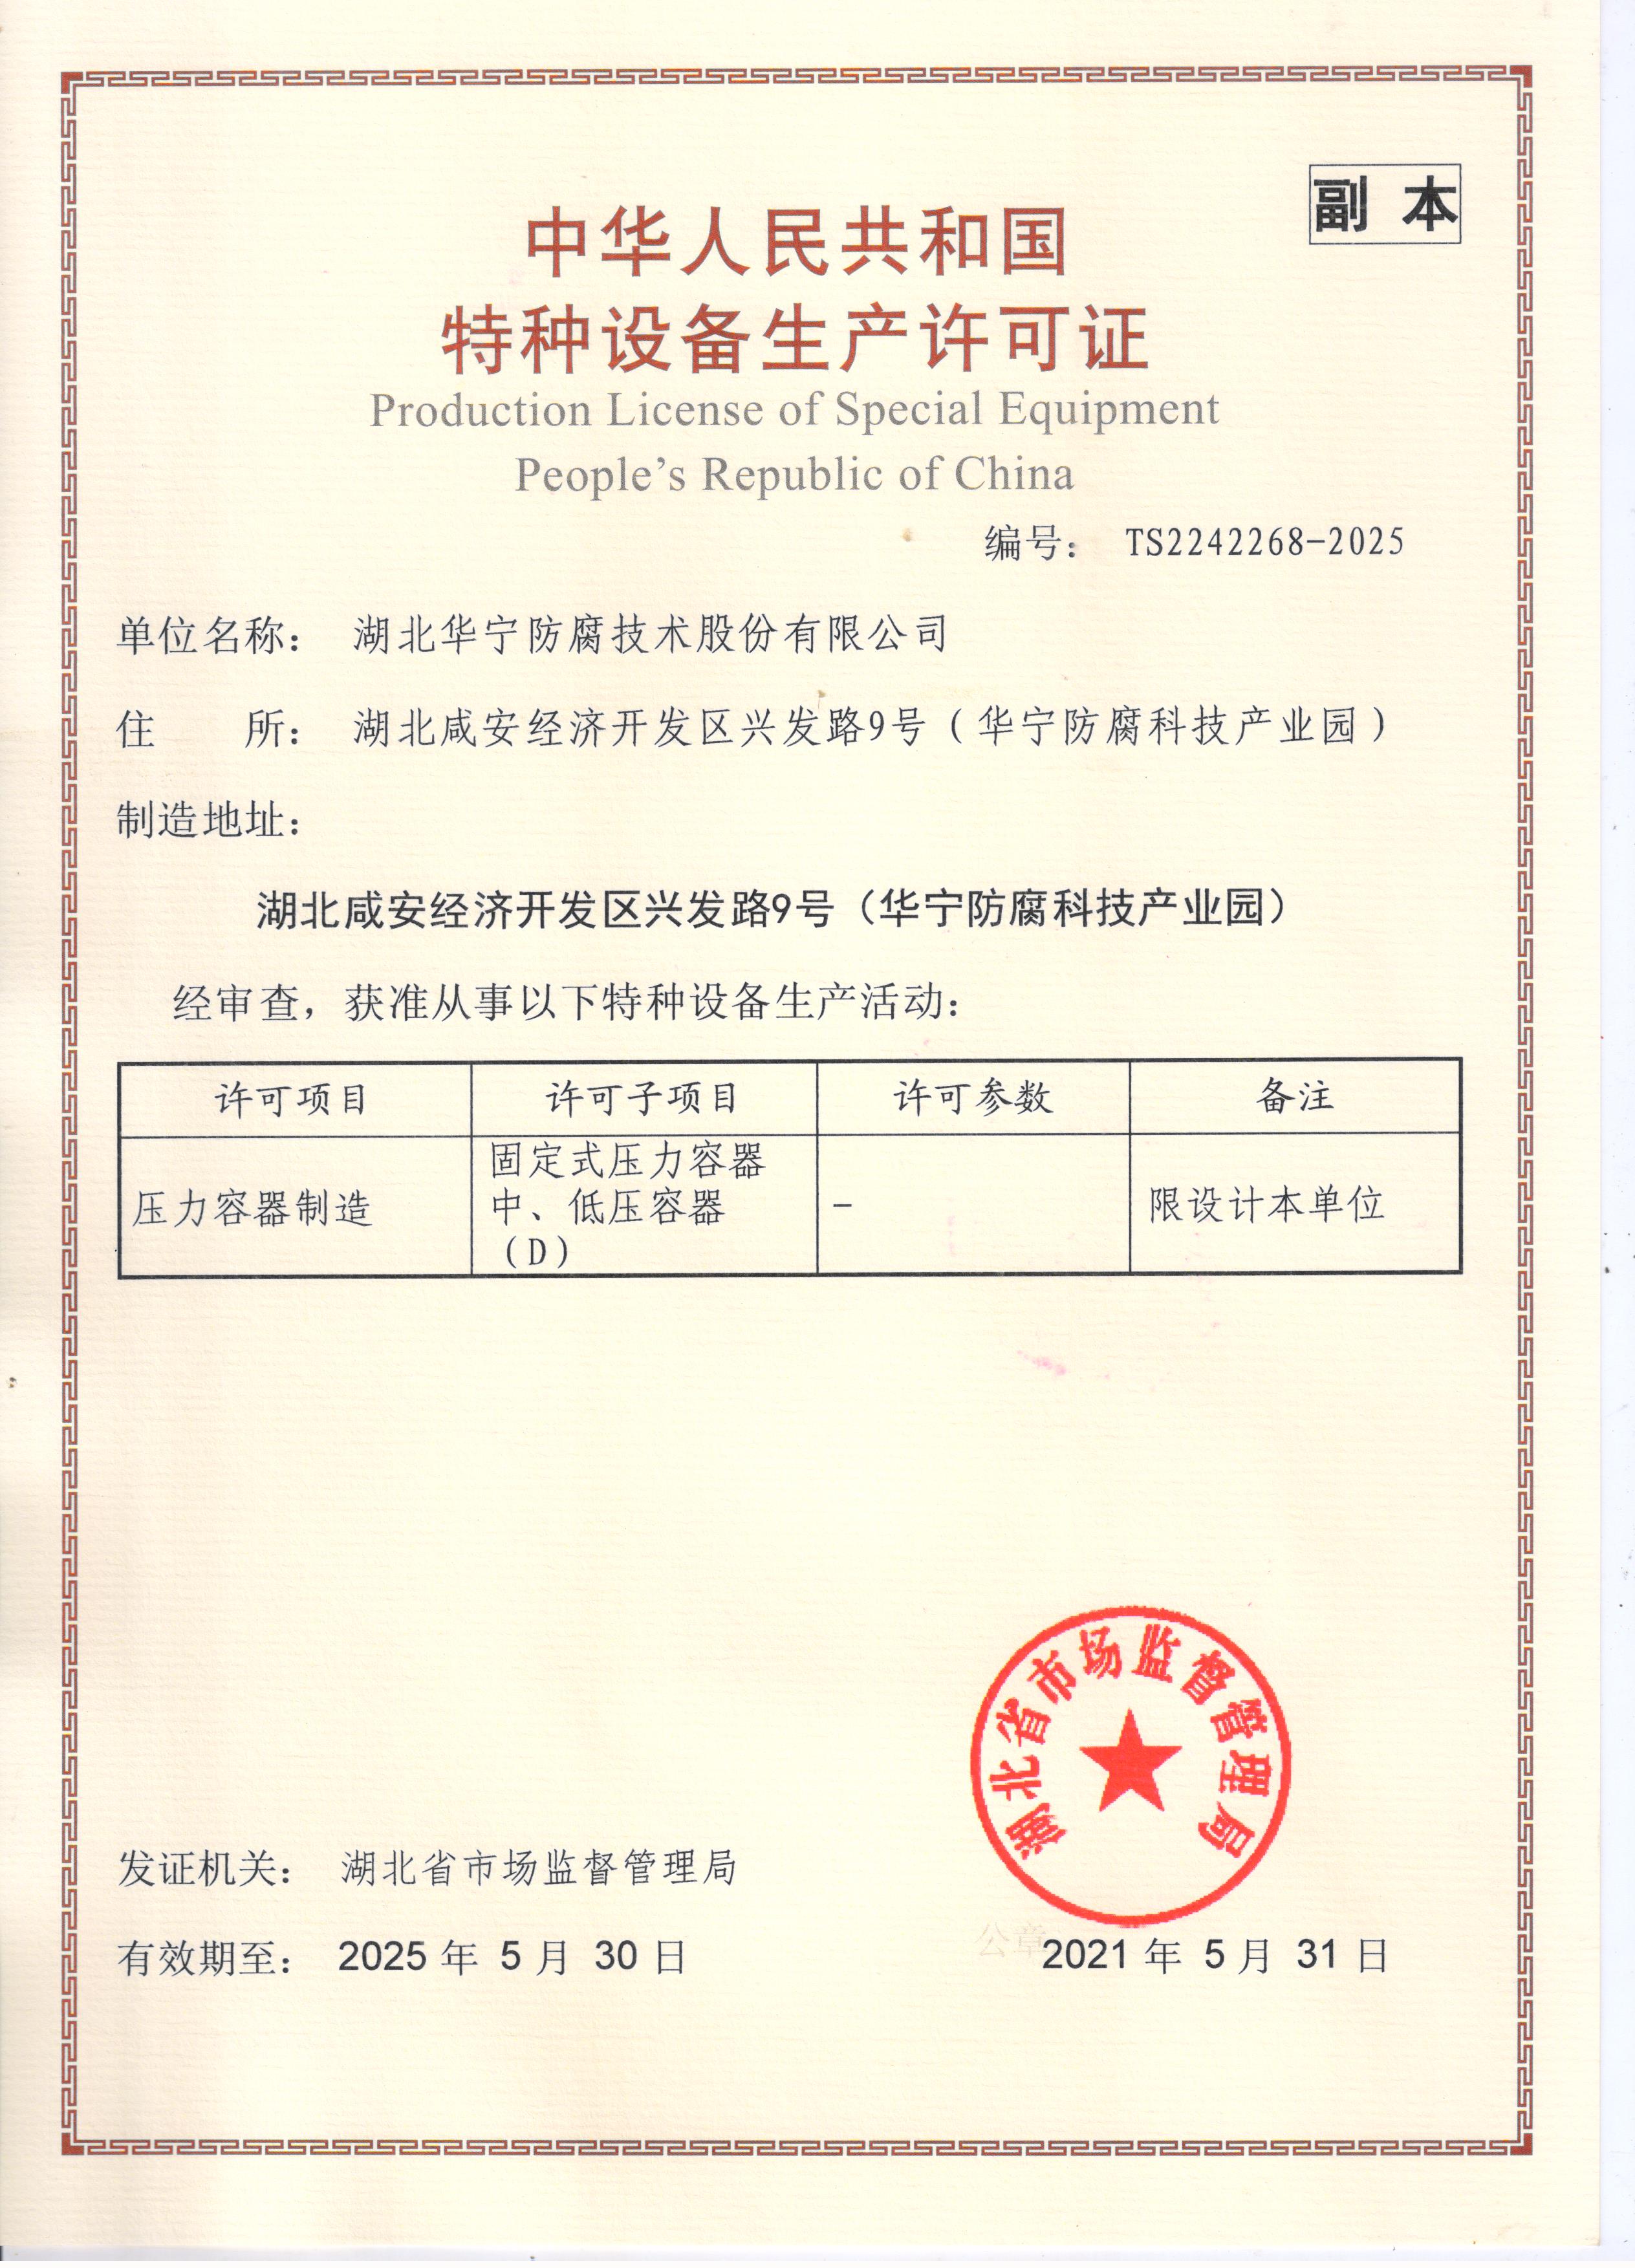 Production Licence Of Special Equipment People's Republic Of China